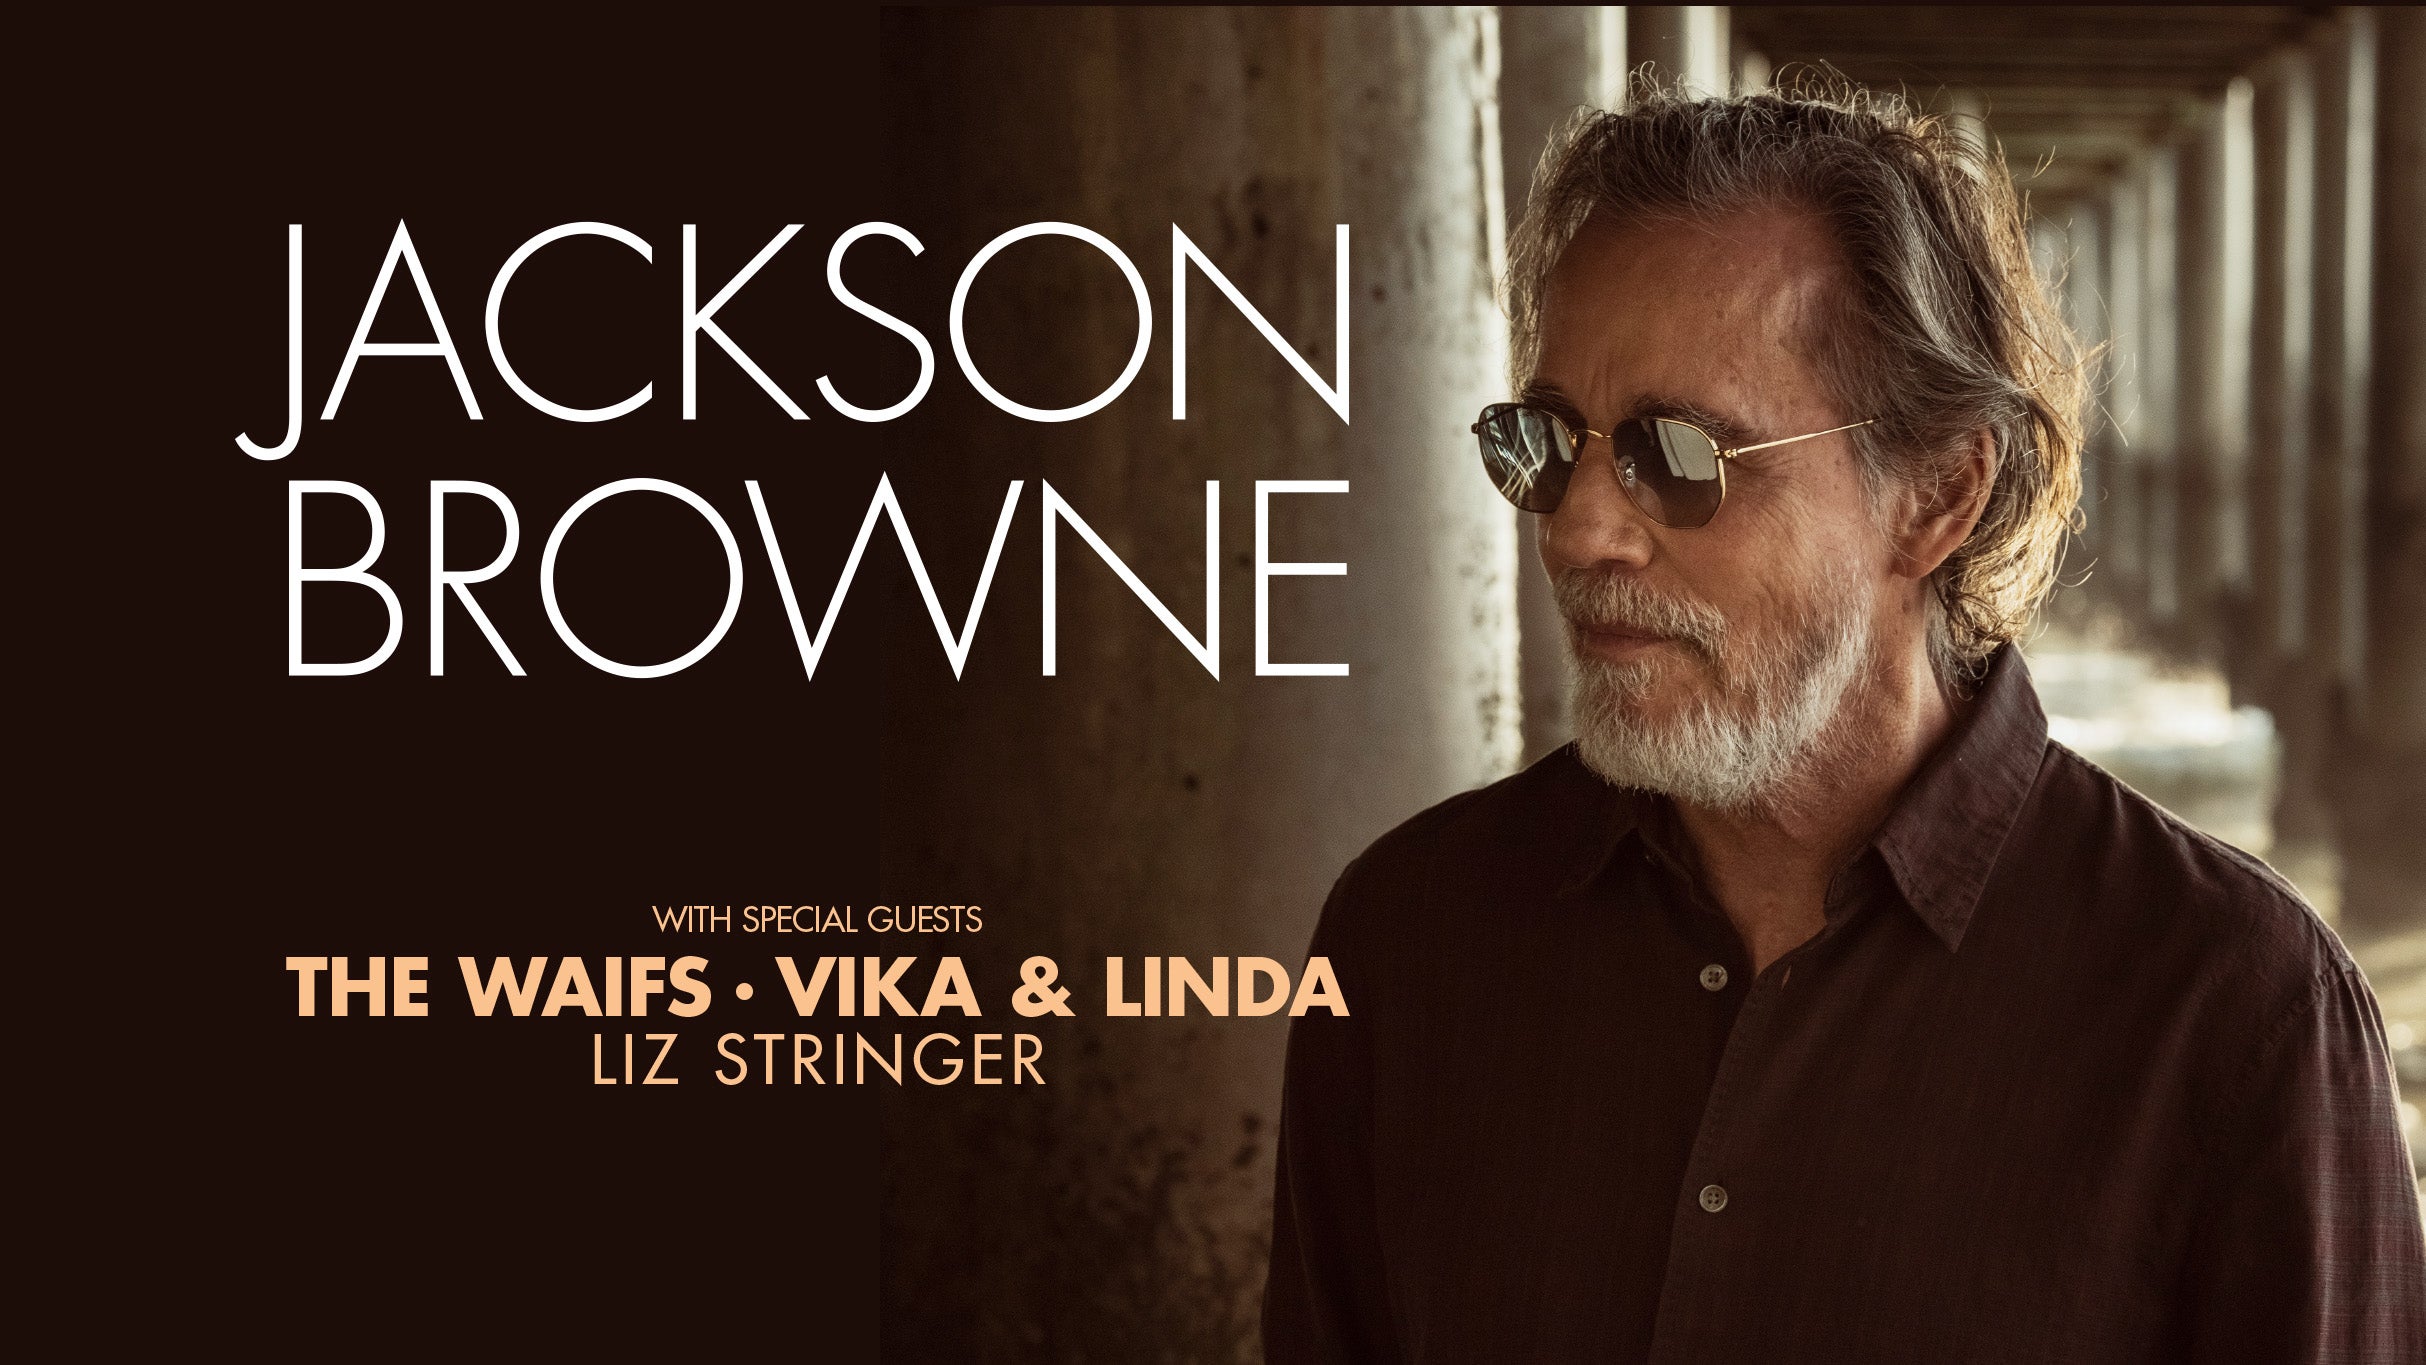 Image used with permission from Ticketmaster | a day on the green - Jackson Browne tickets